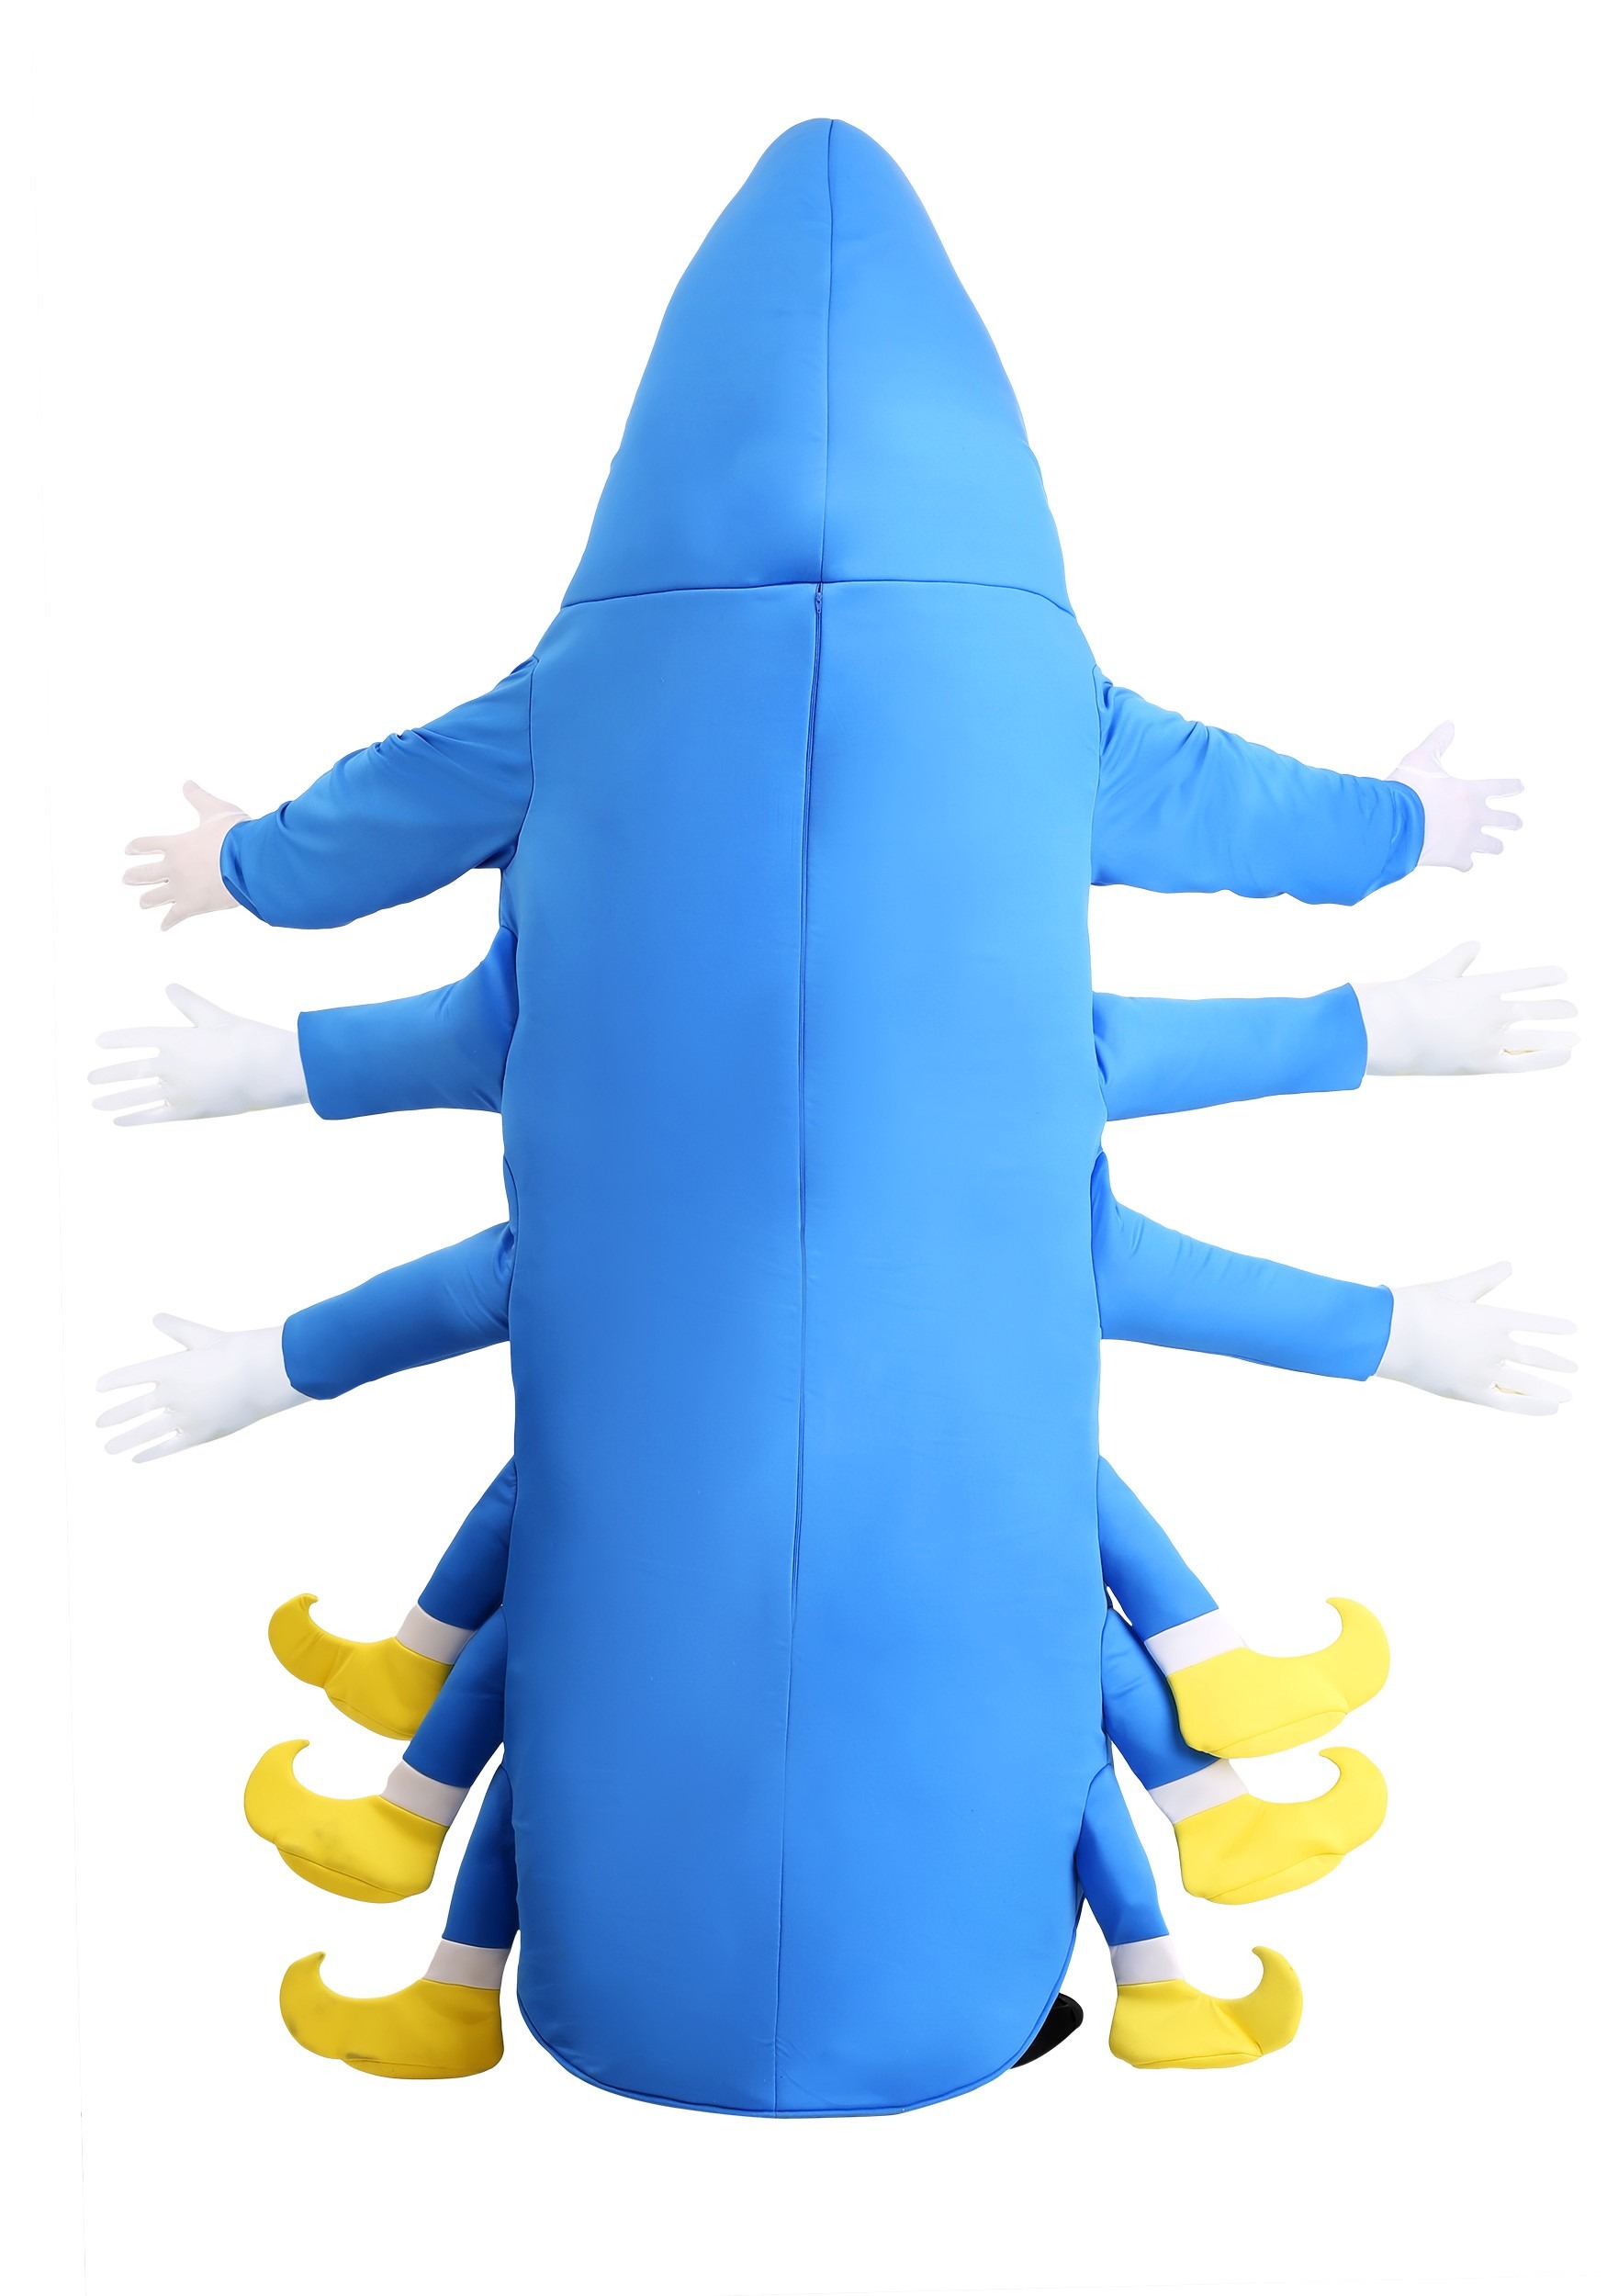 Plus Size Caterpillar Fancy Dress Costume For Adults